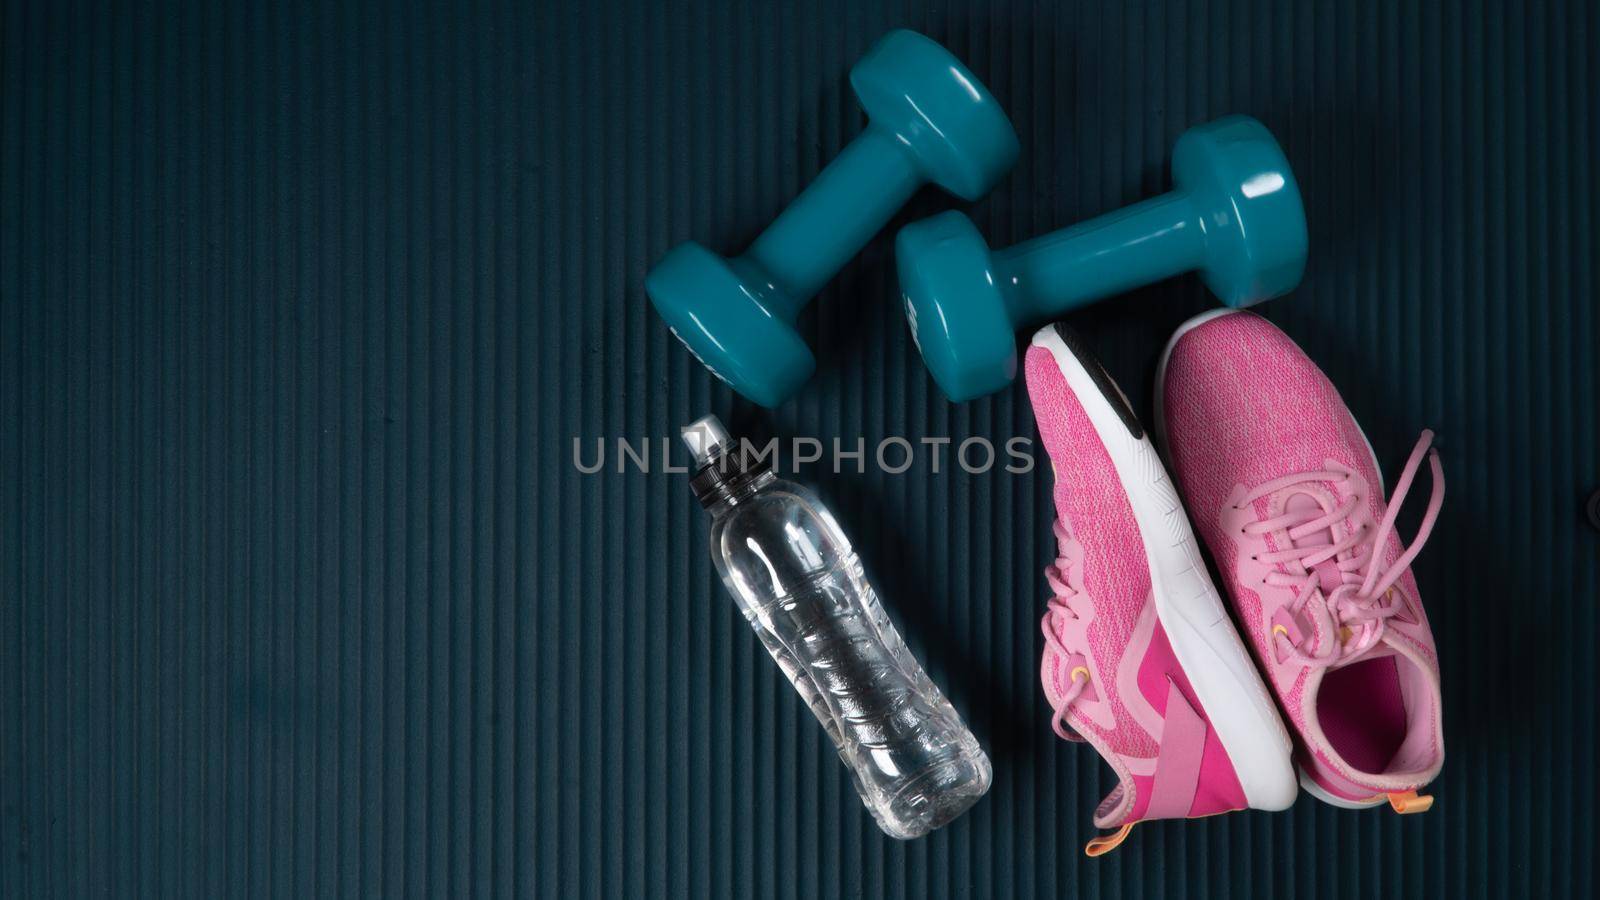 Set for athlete - women's sneakers, dumbbells and a water bottle with space for text by voktybre